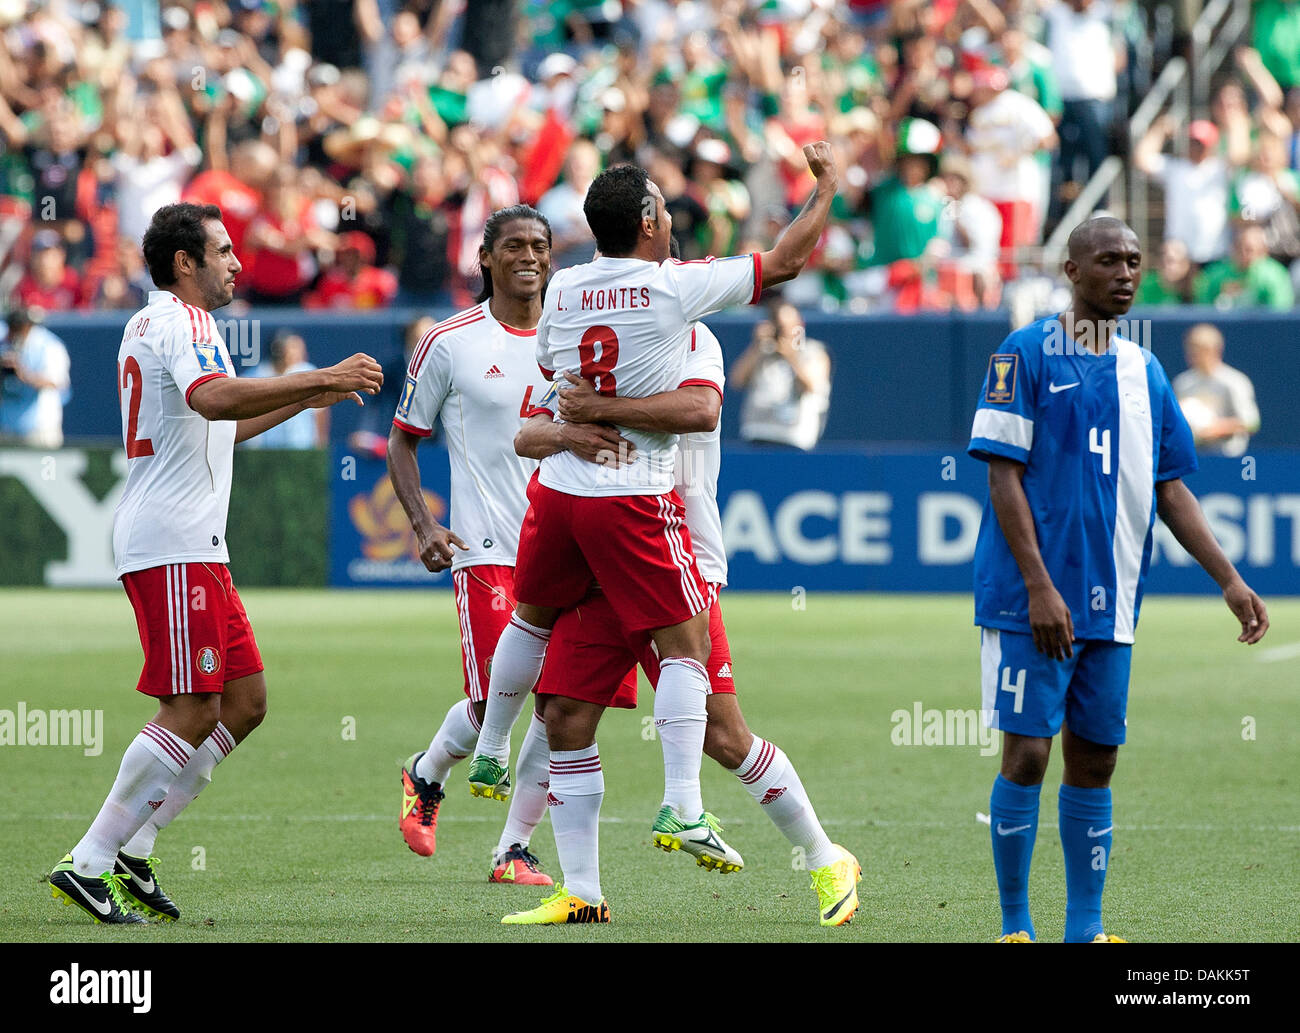 July 14, 2013 - Denver, Colorado, U.S - Mexico's LUIS MONTES, center, gets hugged by team mate after scoring the 2nd. goal of the game during the 1st. half at Sports Authority Field at Mile High Sunday afternoon. Mexico defeats Martinique 3-1. (Credit Image: © Hector Acevedo/ZUMAPRESS.com) Stock Photo